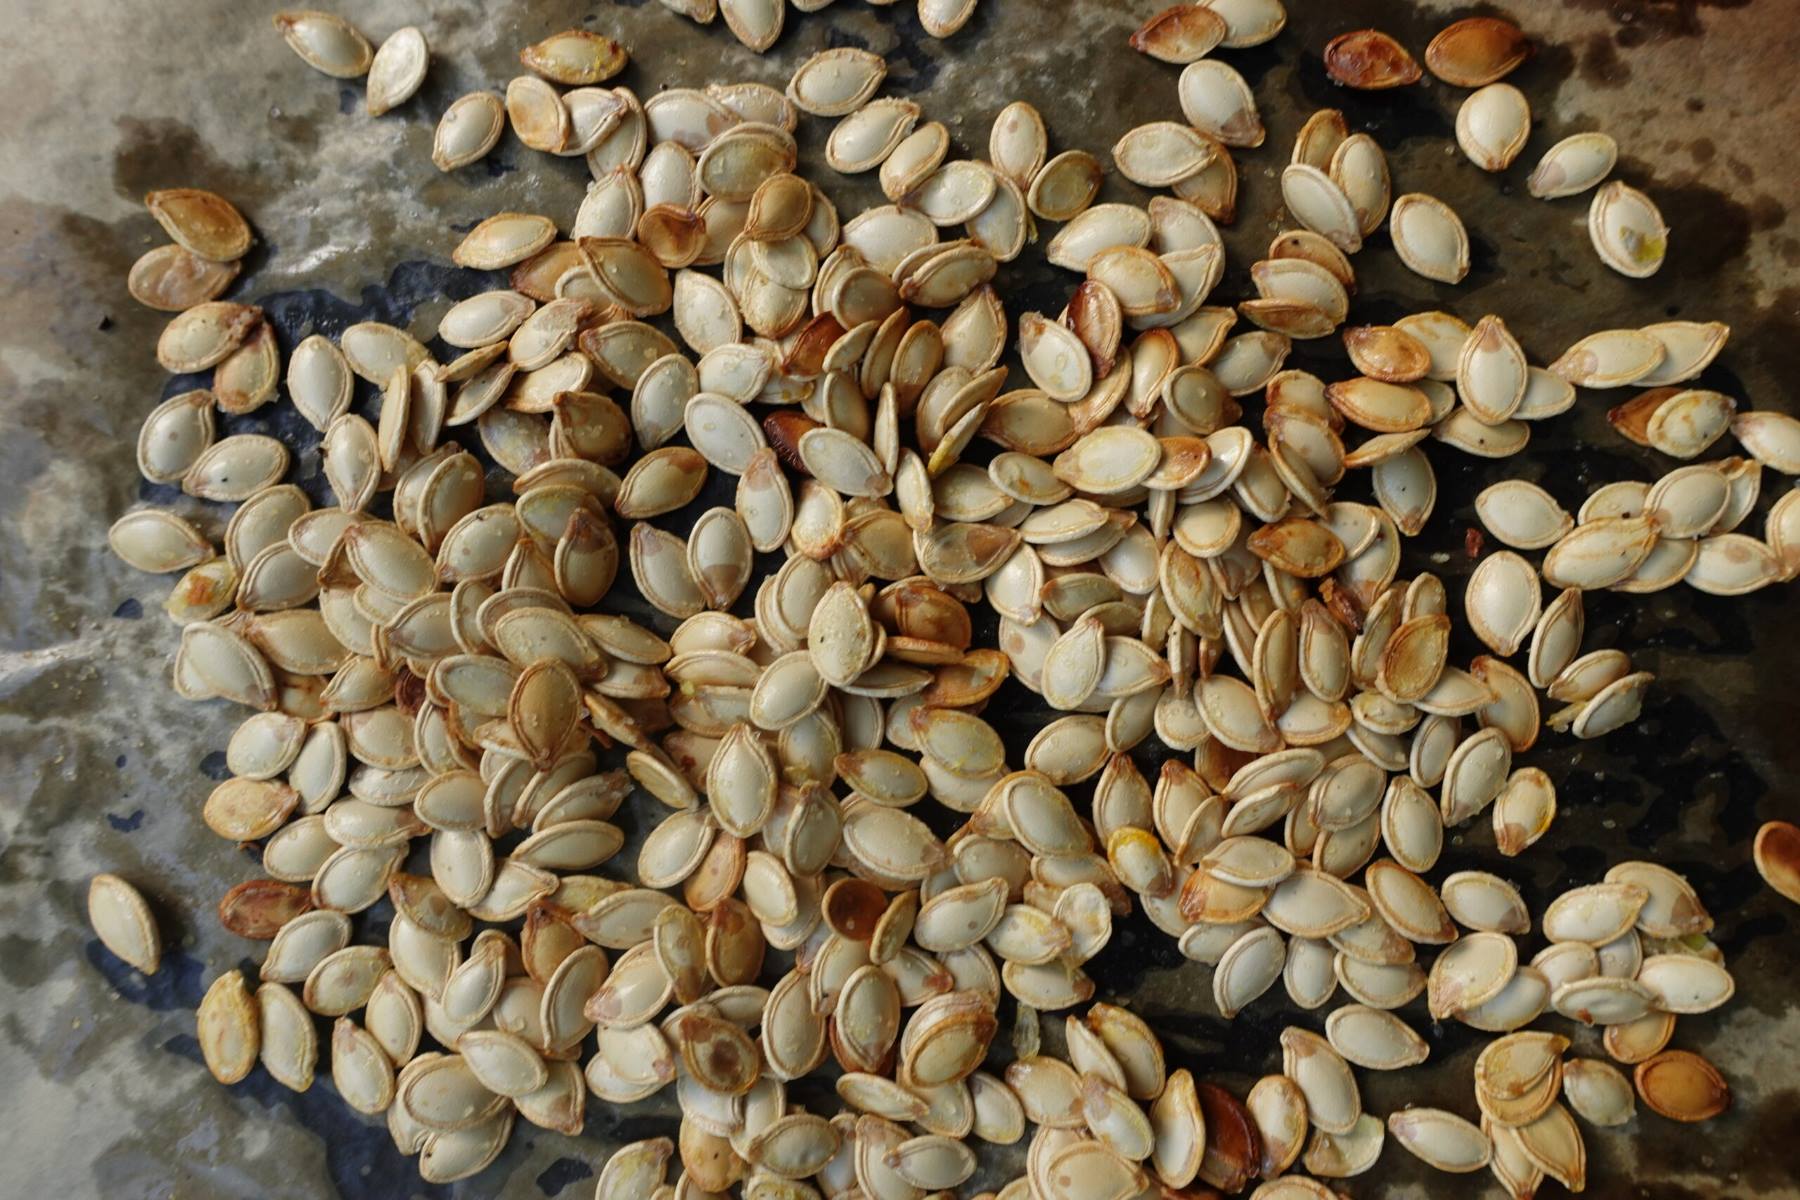 How To Start Squash Seeds